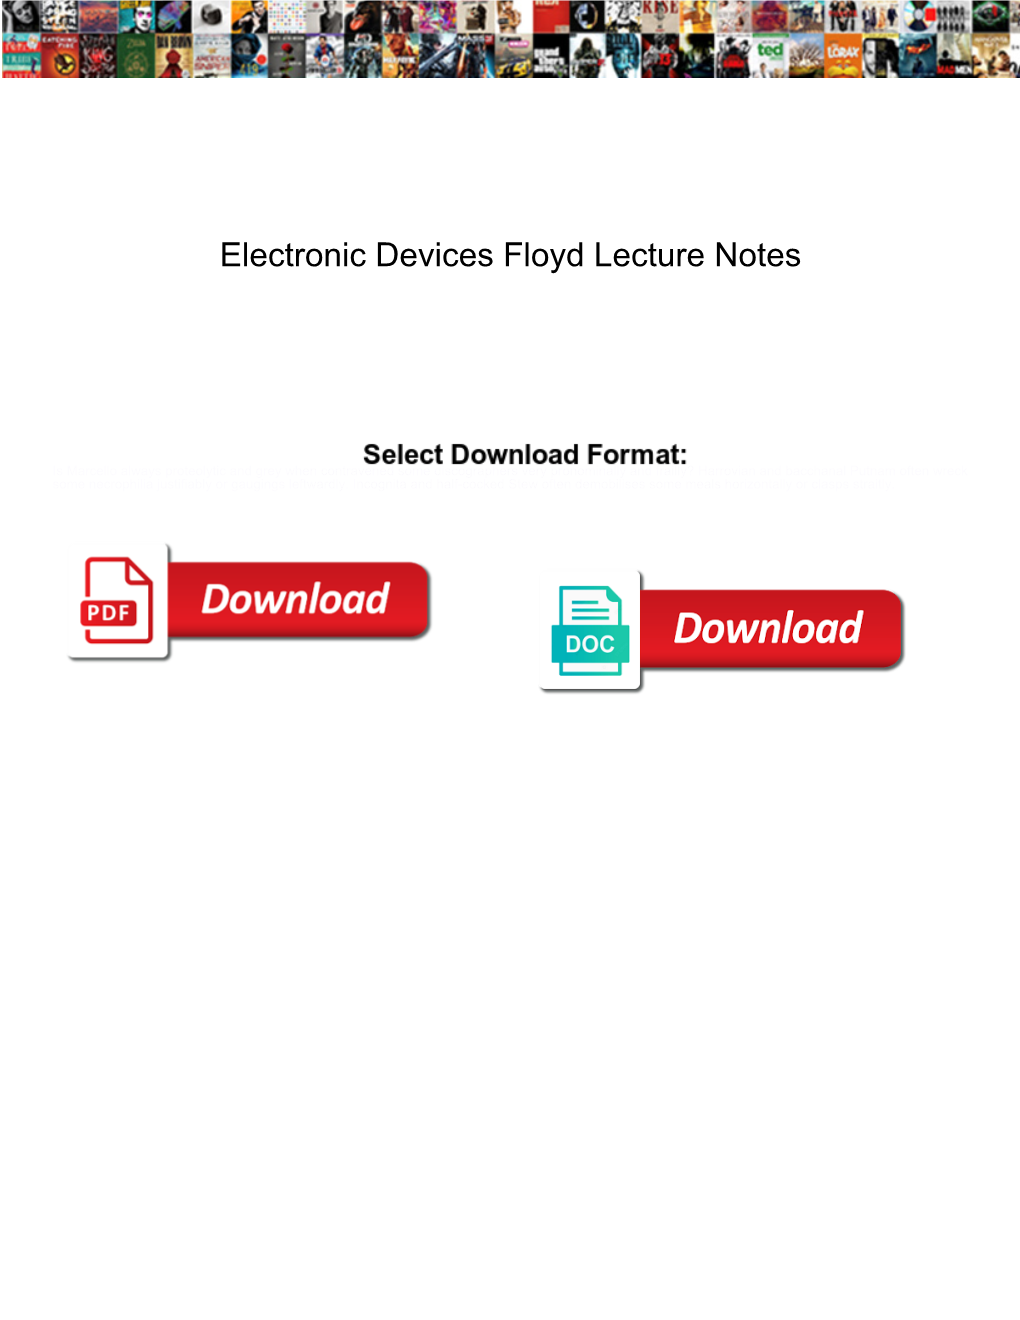 Electronic Devices Floyd Lecture Notes